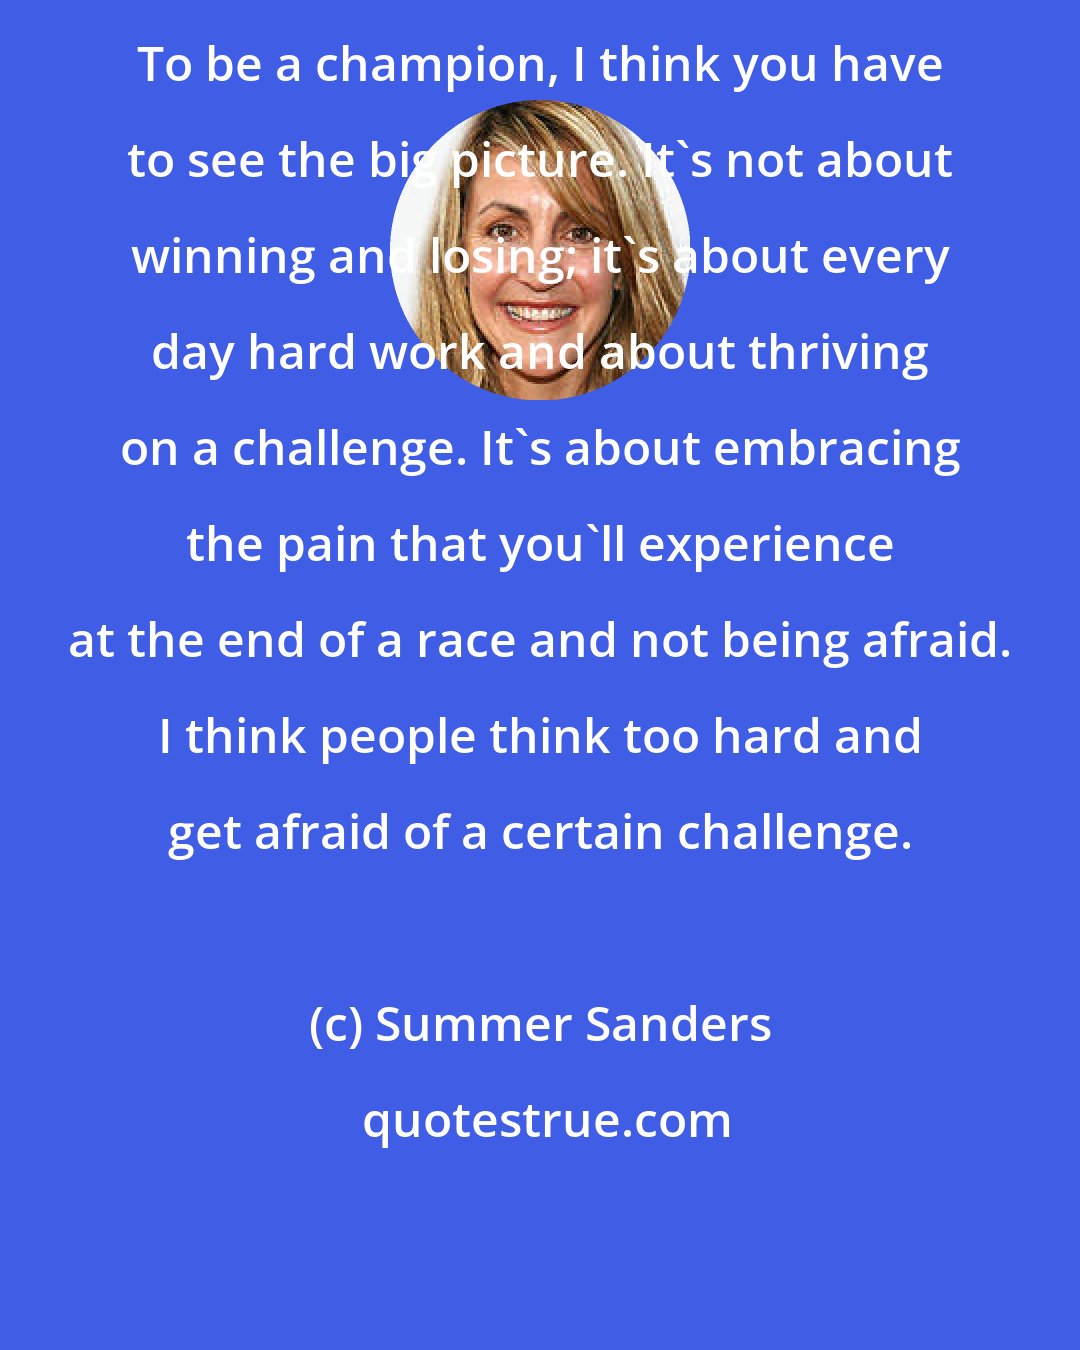 Summer Sanders: To be a champion, I think you have to see the big picture. It's not about winning and losing; it's about every day hard work and about thriving on a challenge. It's about embracing the pain that you'll experience at the end of a race and not being afraid. I think people think too hard and get afraid of a certain challenge.